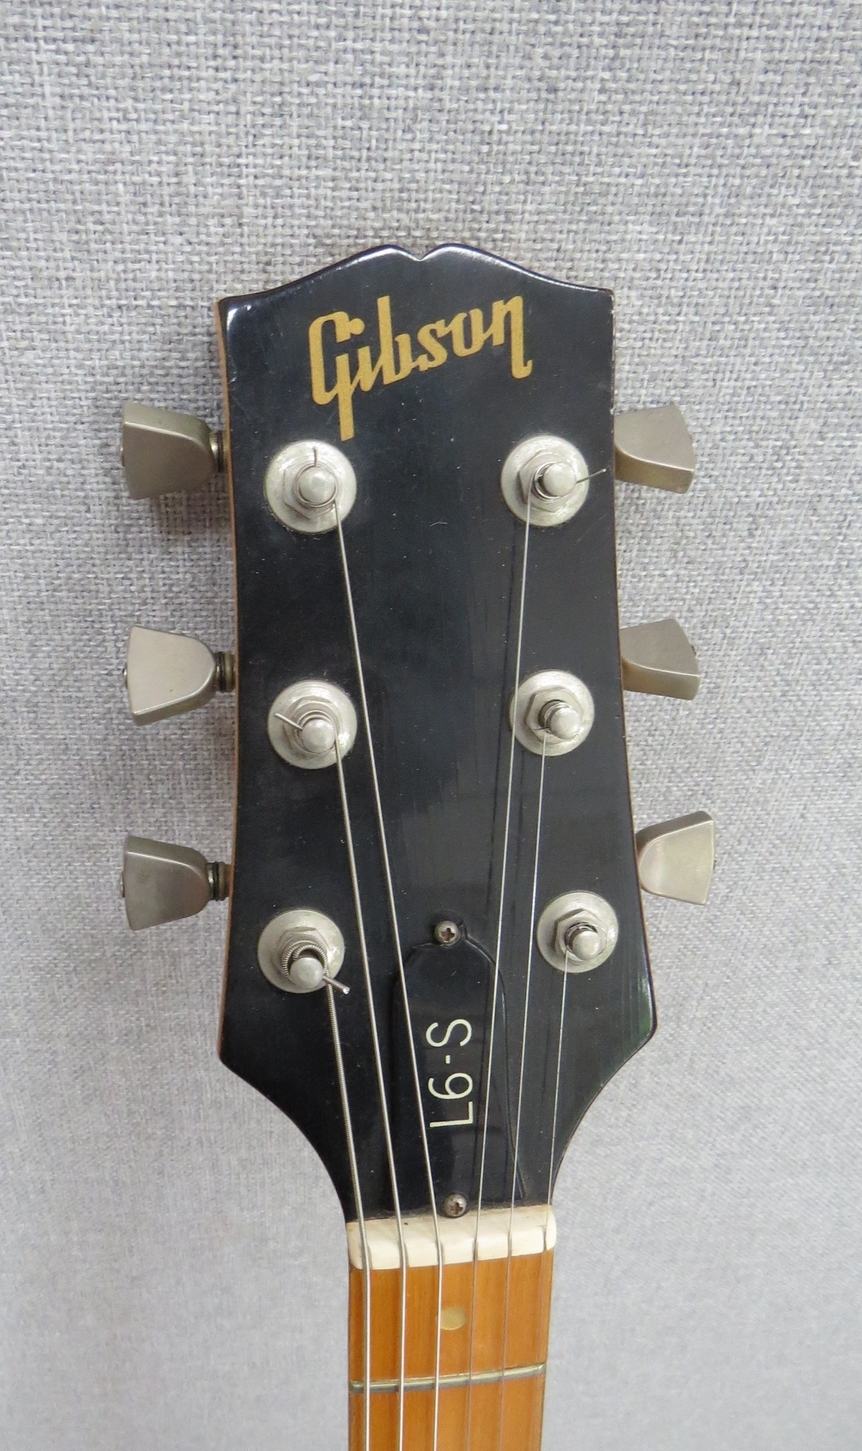 A Gibson L6-S electric guitar with maple body and neck, black pickguard, twin humbucker pickups, - Image 2 of 6